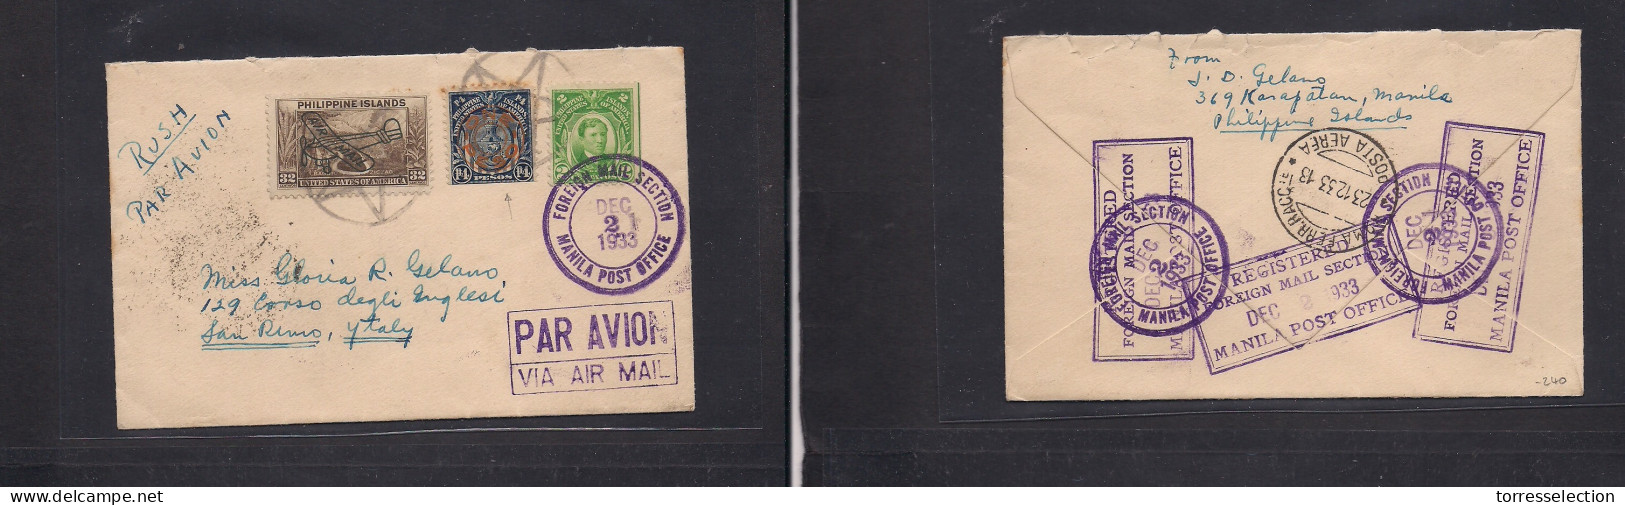 PHILIPPINES. 1933 (2 Dec) Kasapatan, Manila - San Remo, Italy (23 Dec) Air Multifkd Ovptd Issues Including 4 Pesos Red O - Philippines